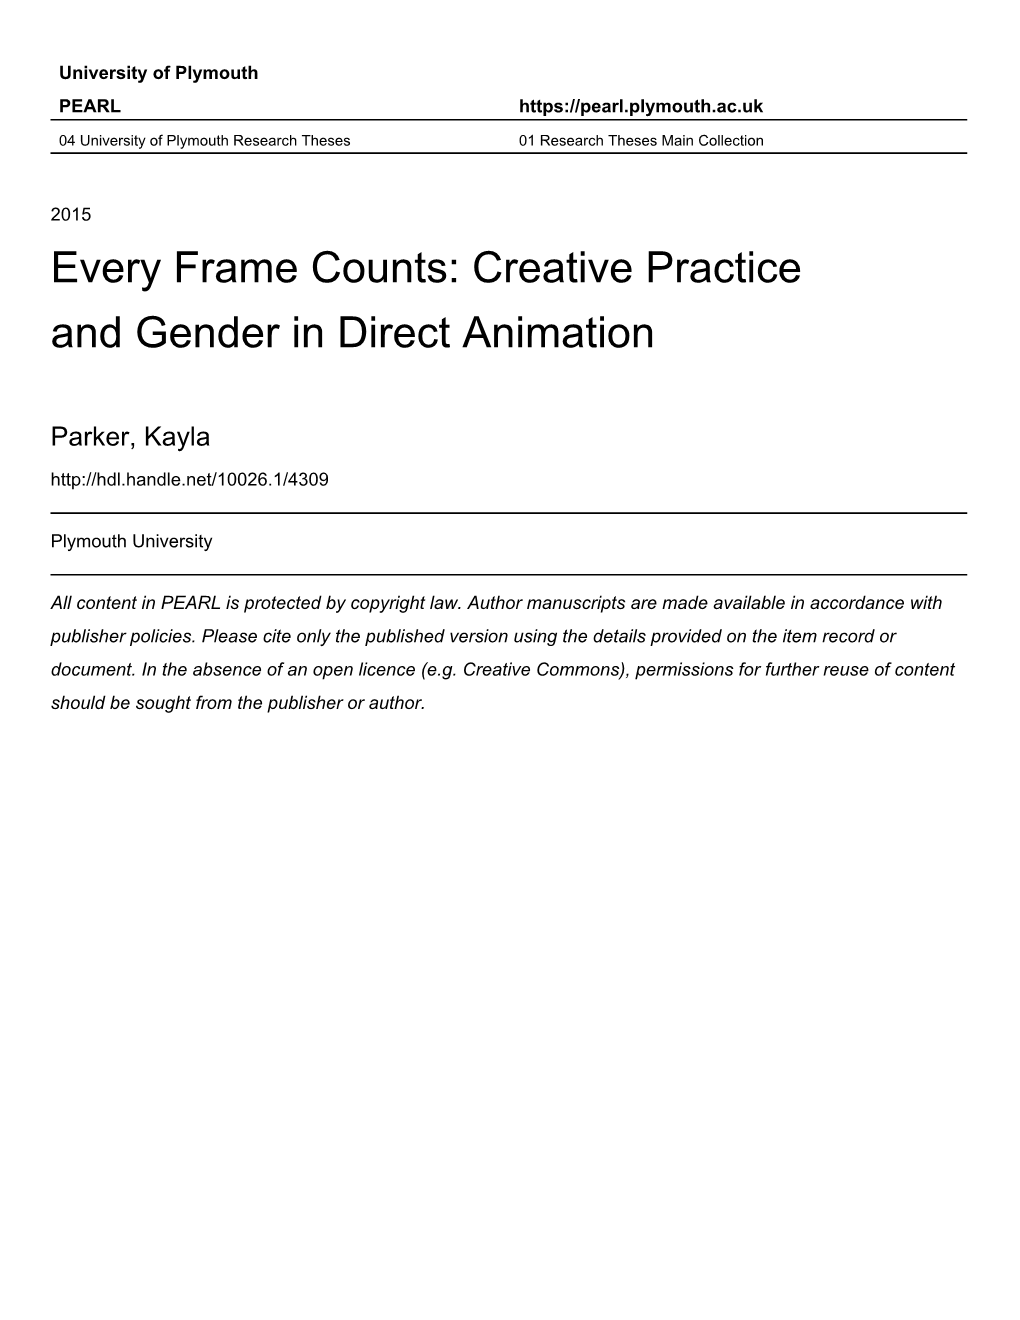 Creative Practice and Gender in Direct Animation by Kayla Parker A